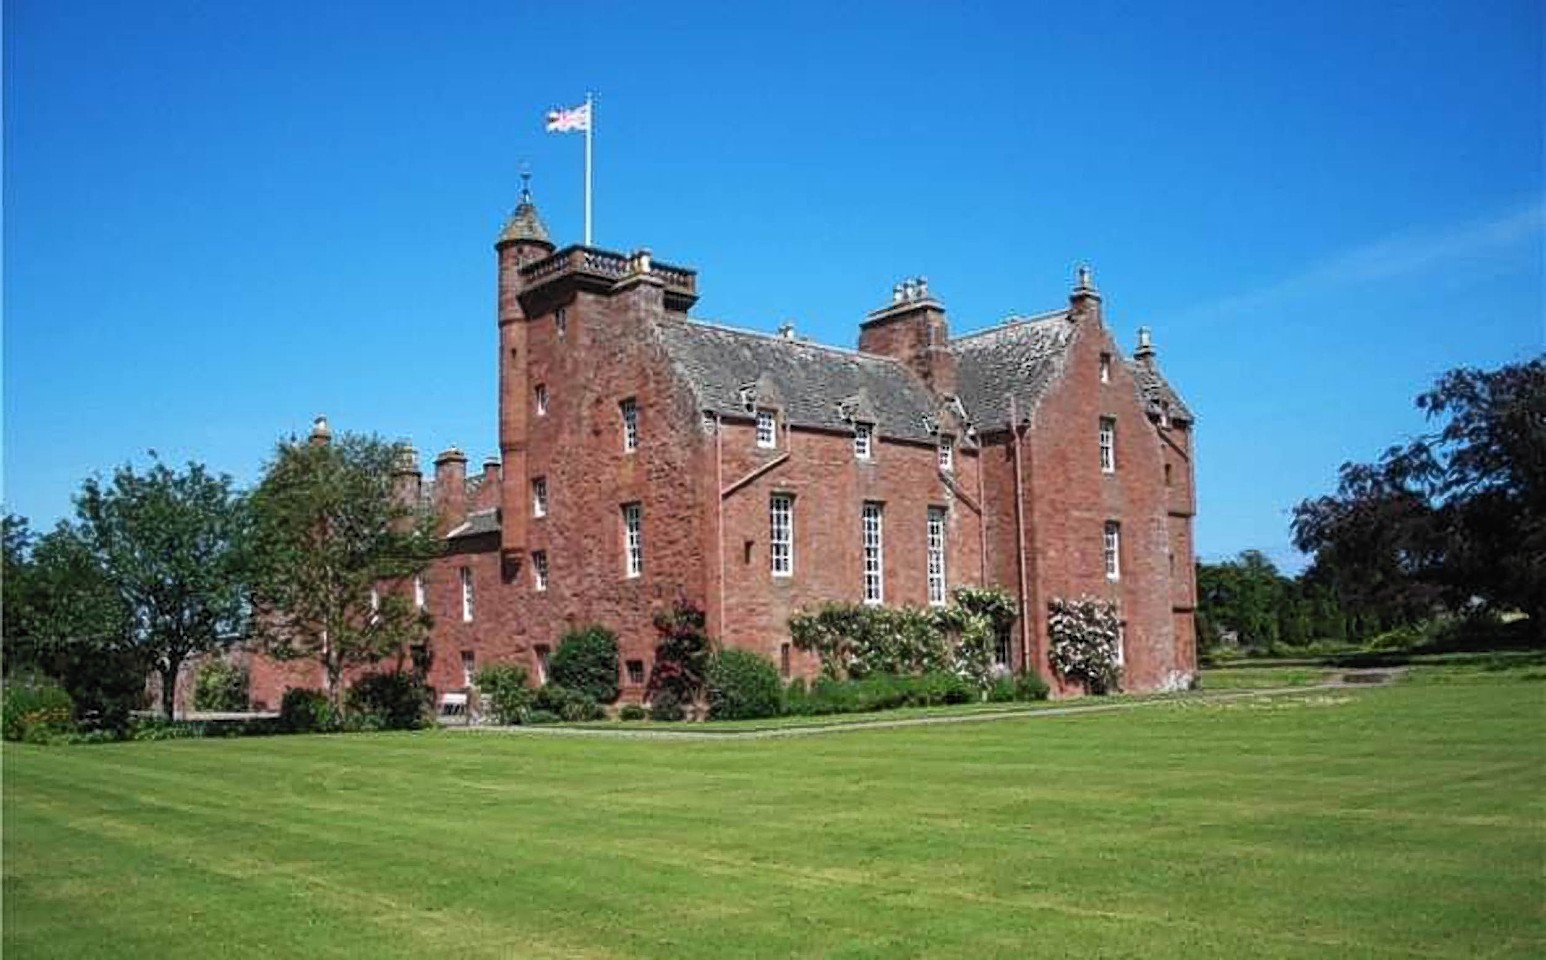 The stunning castle has been valued at £1.65million